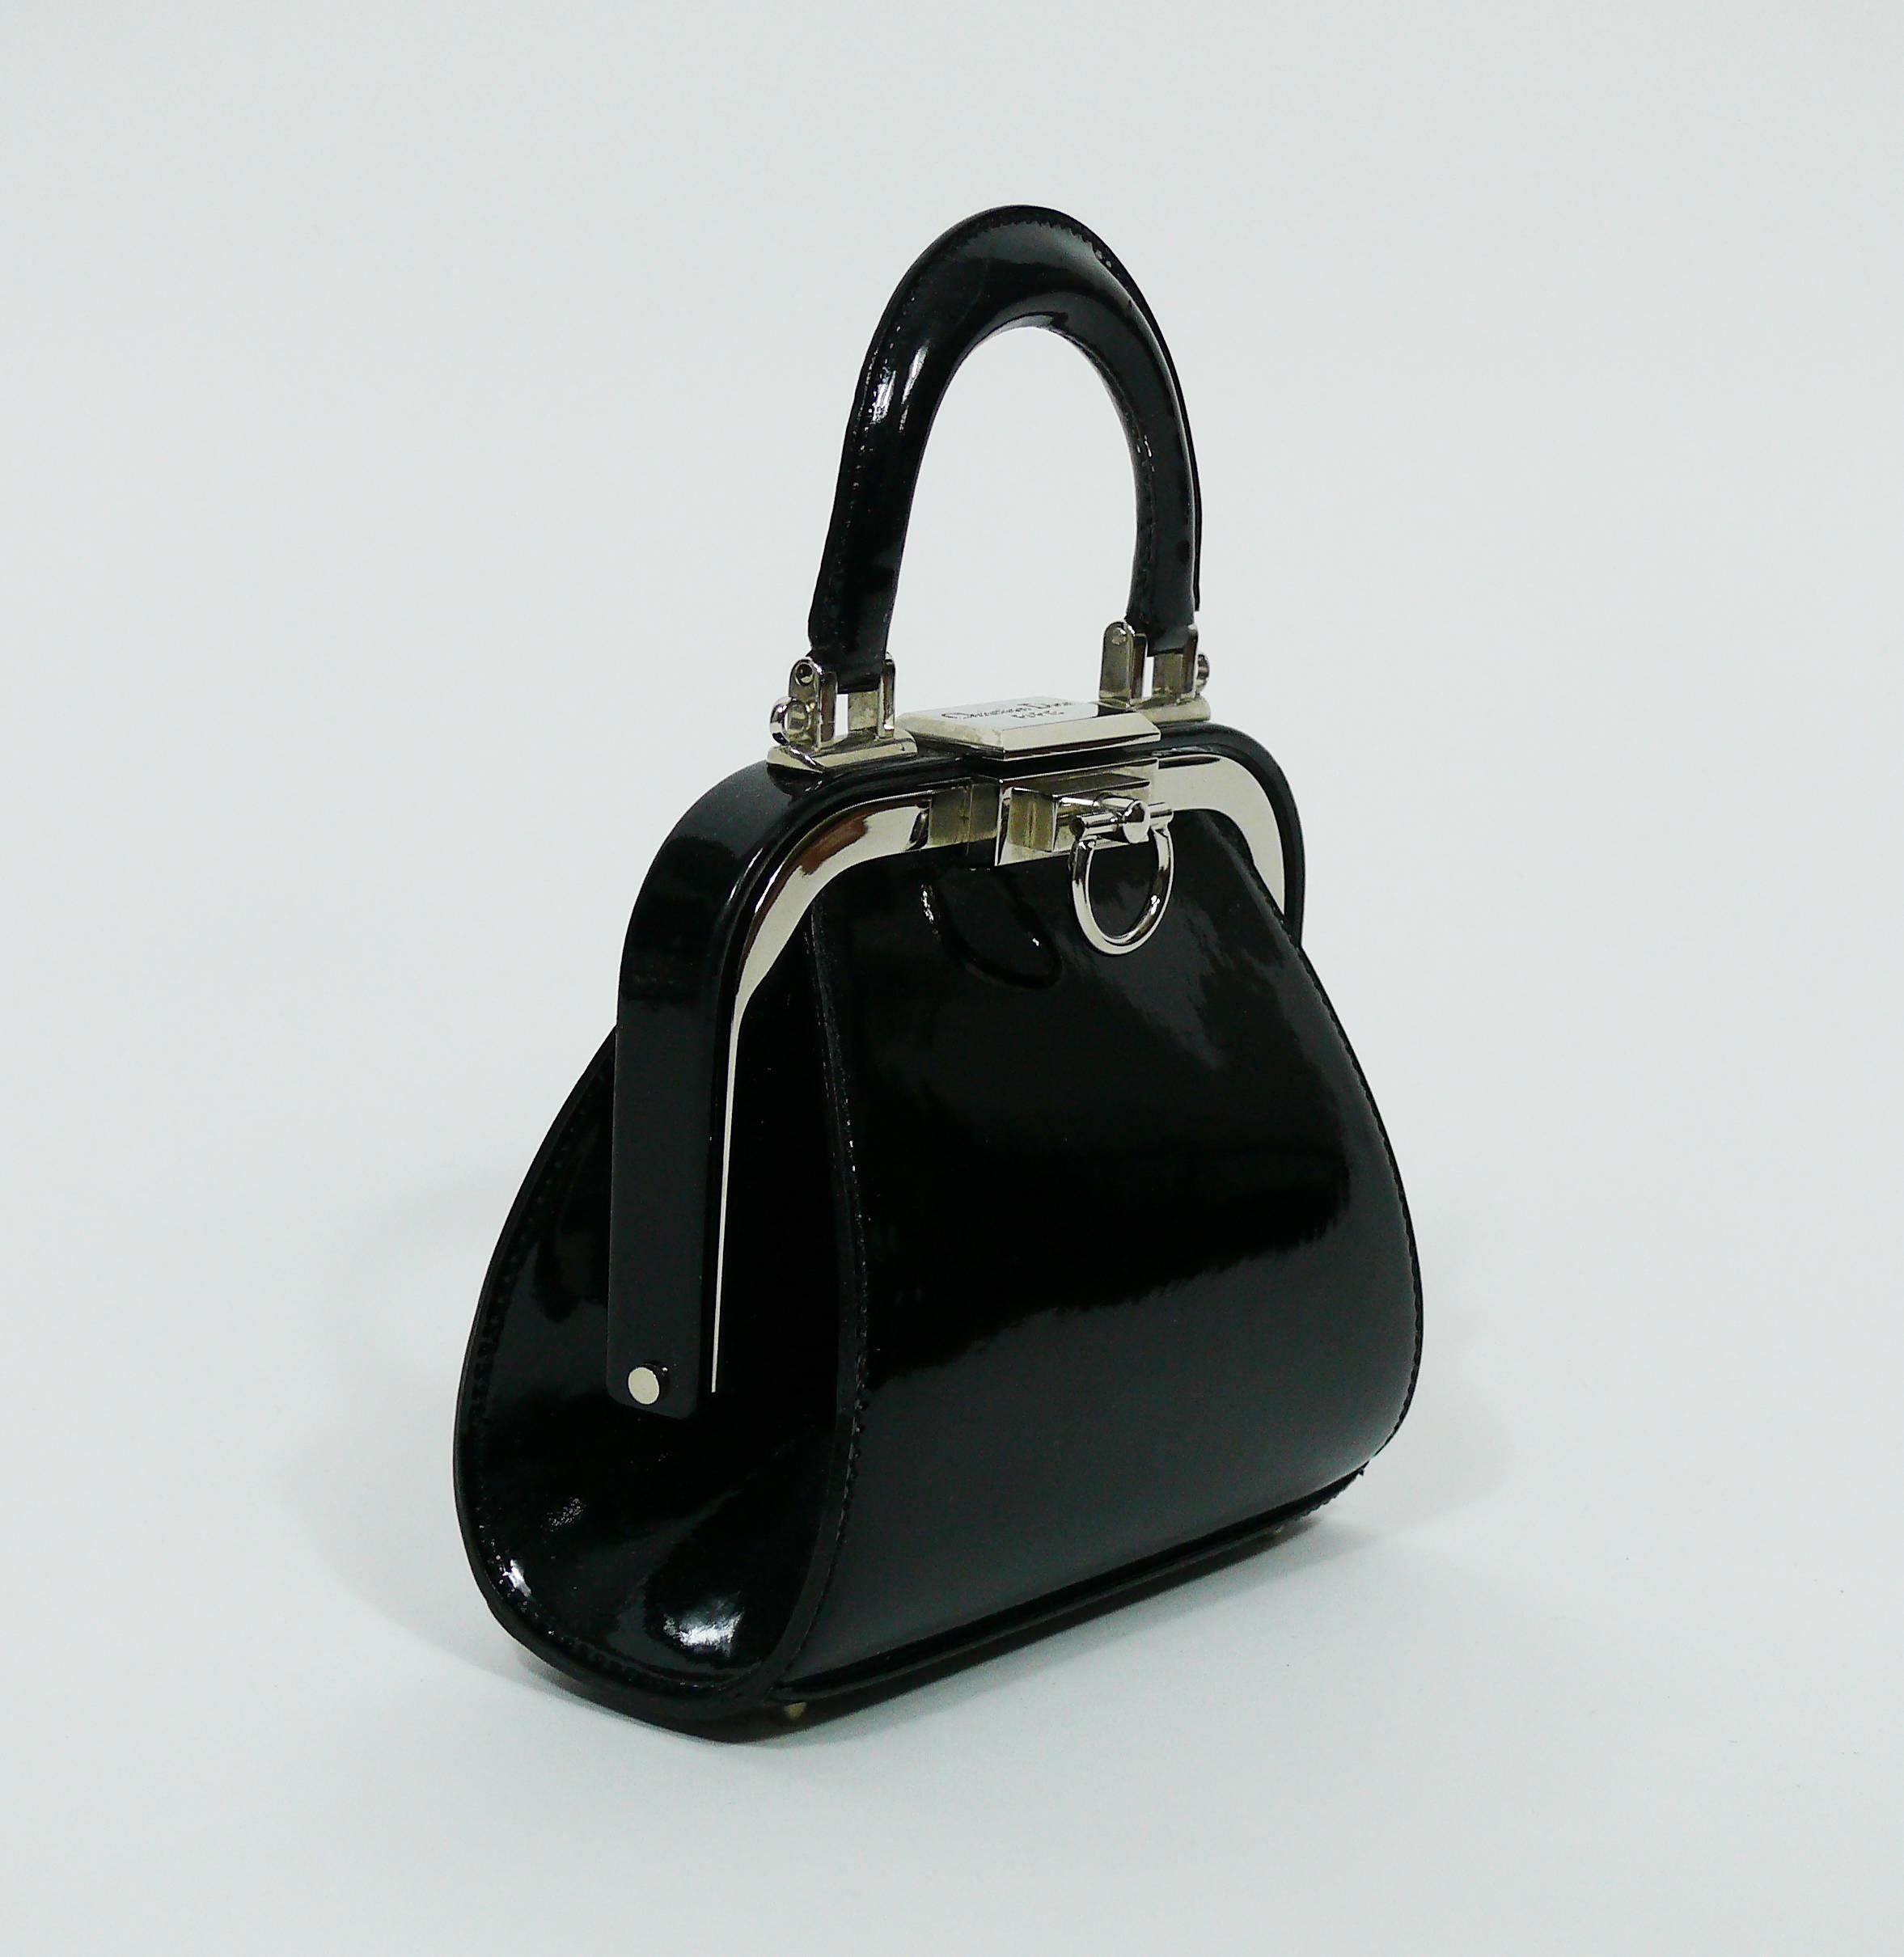 CHRISTIAN DIOR vintage rare doctor style micro mini handbag in black patent leather.

Silver toned hardware.
Black cannage motif lining.

One inner pocket.

Engraved CHRISTIAN DIOR Paris on the clasp.
Embossed on a leather label CHRISTIAN DIOR